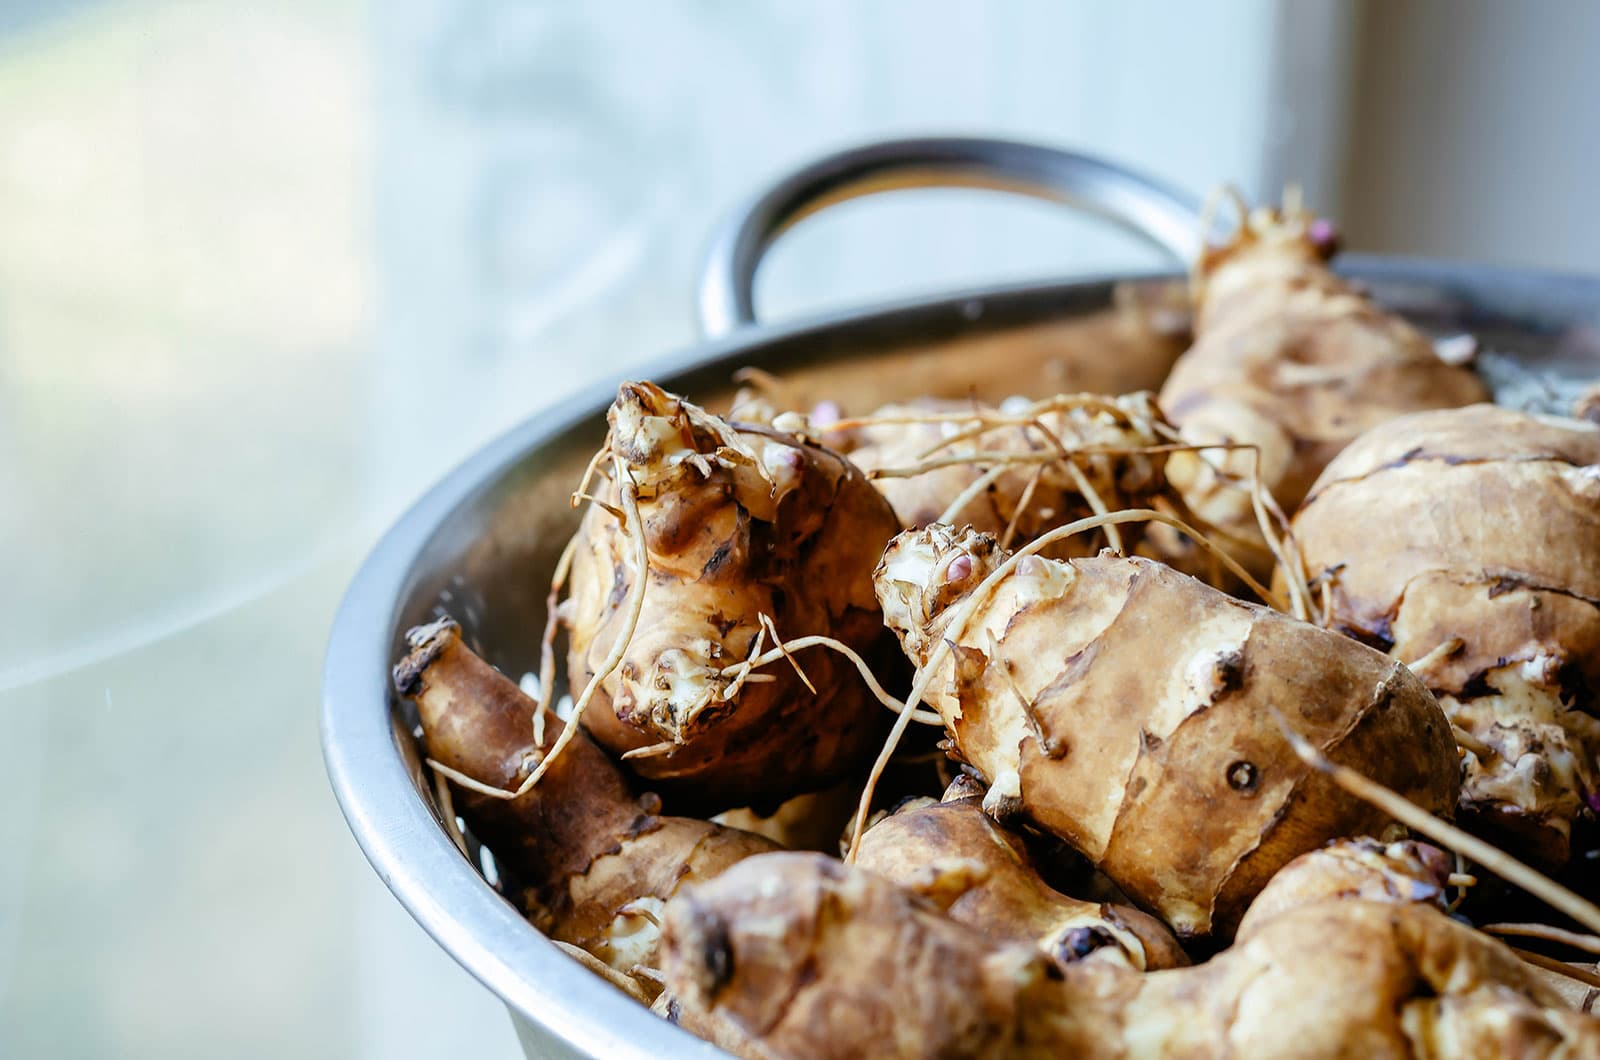 Sunchoke tubers piled together in a colander